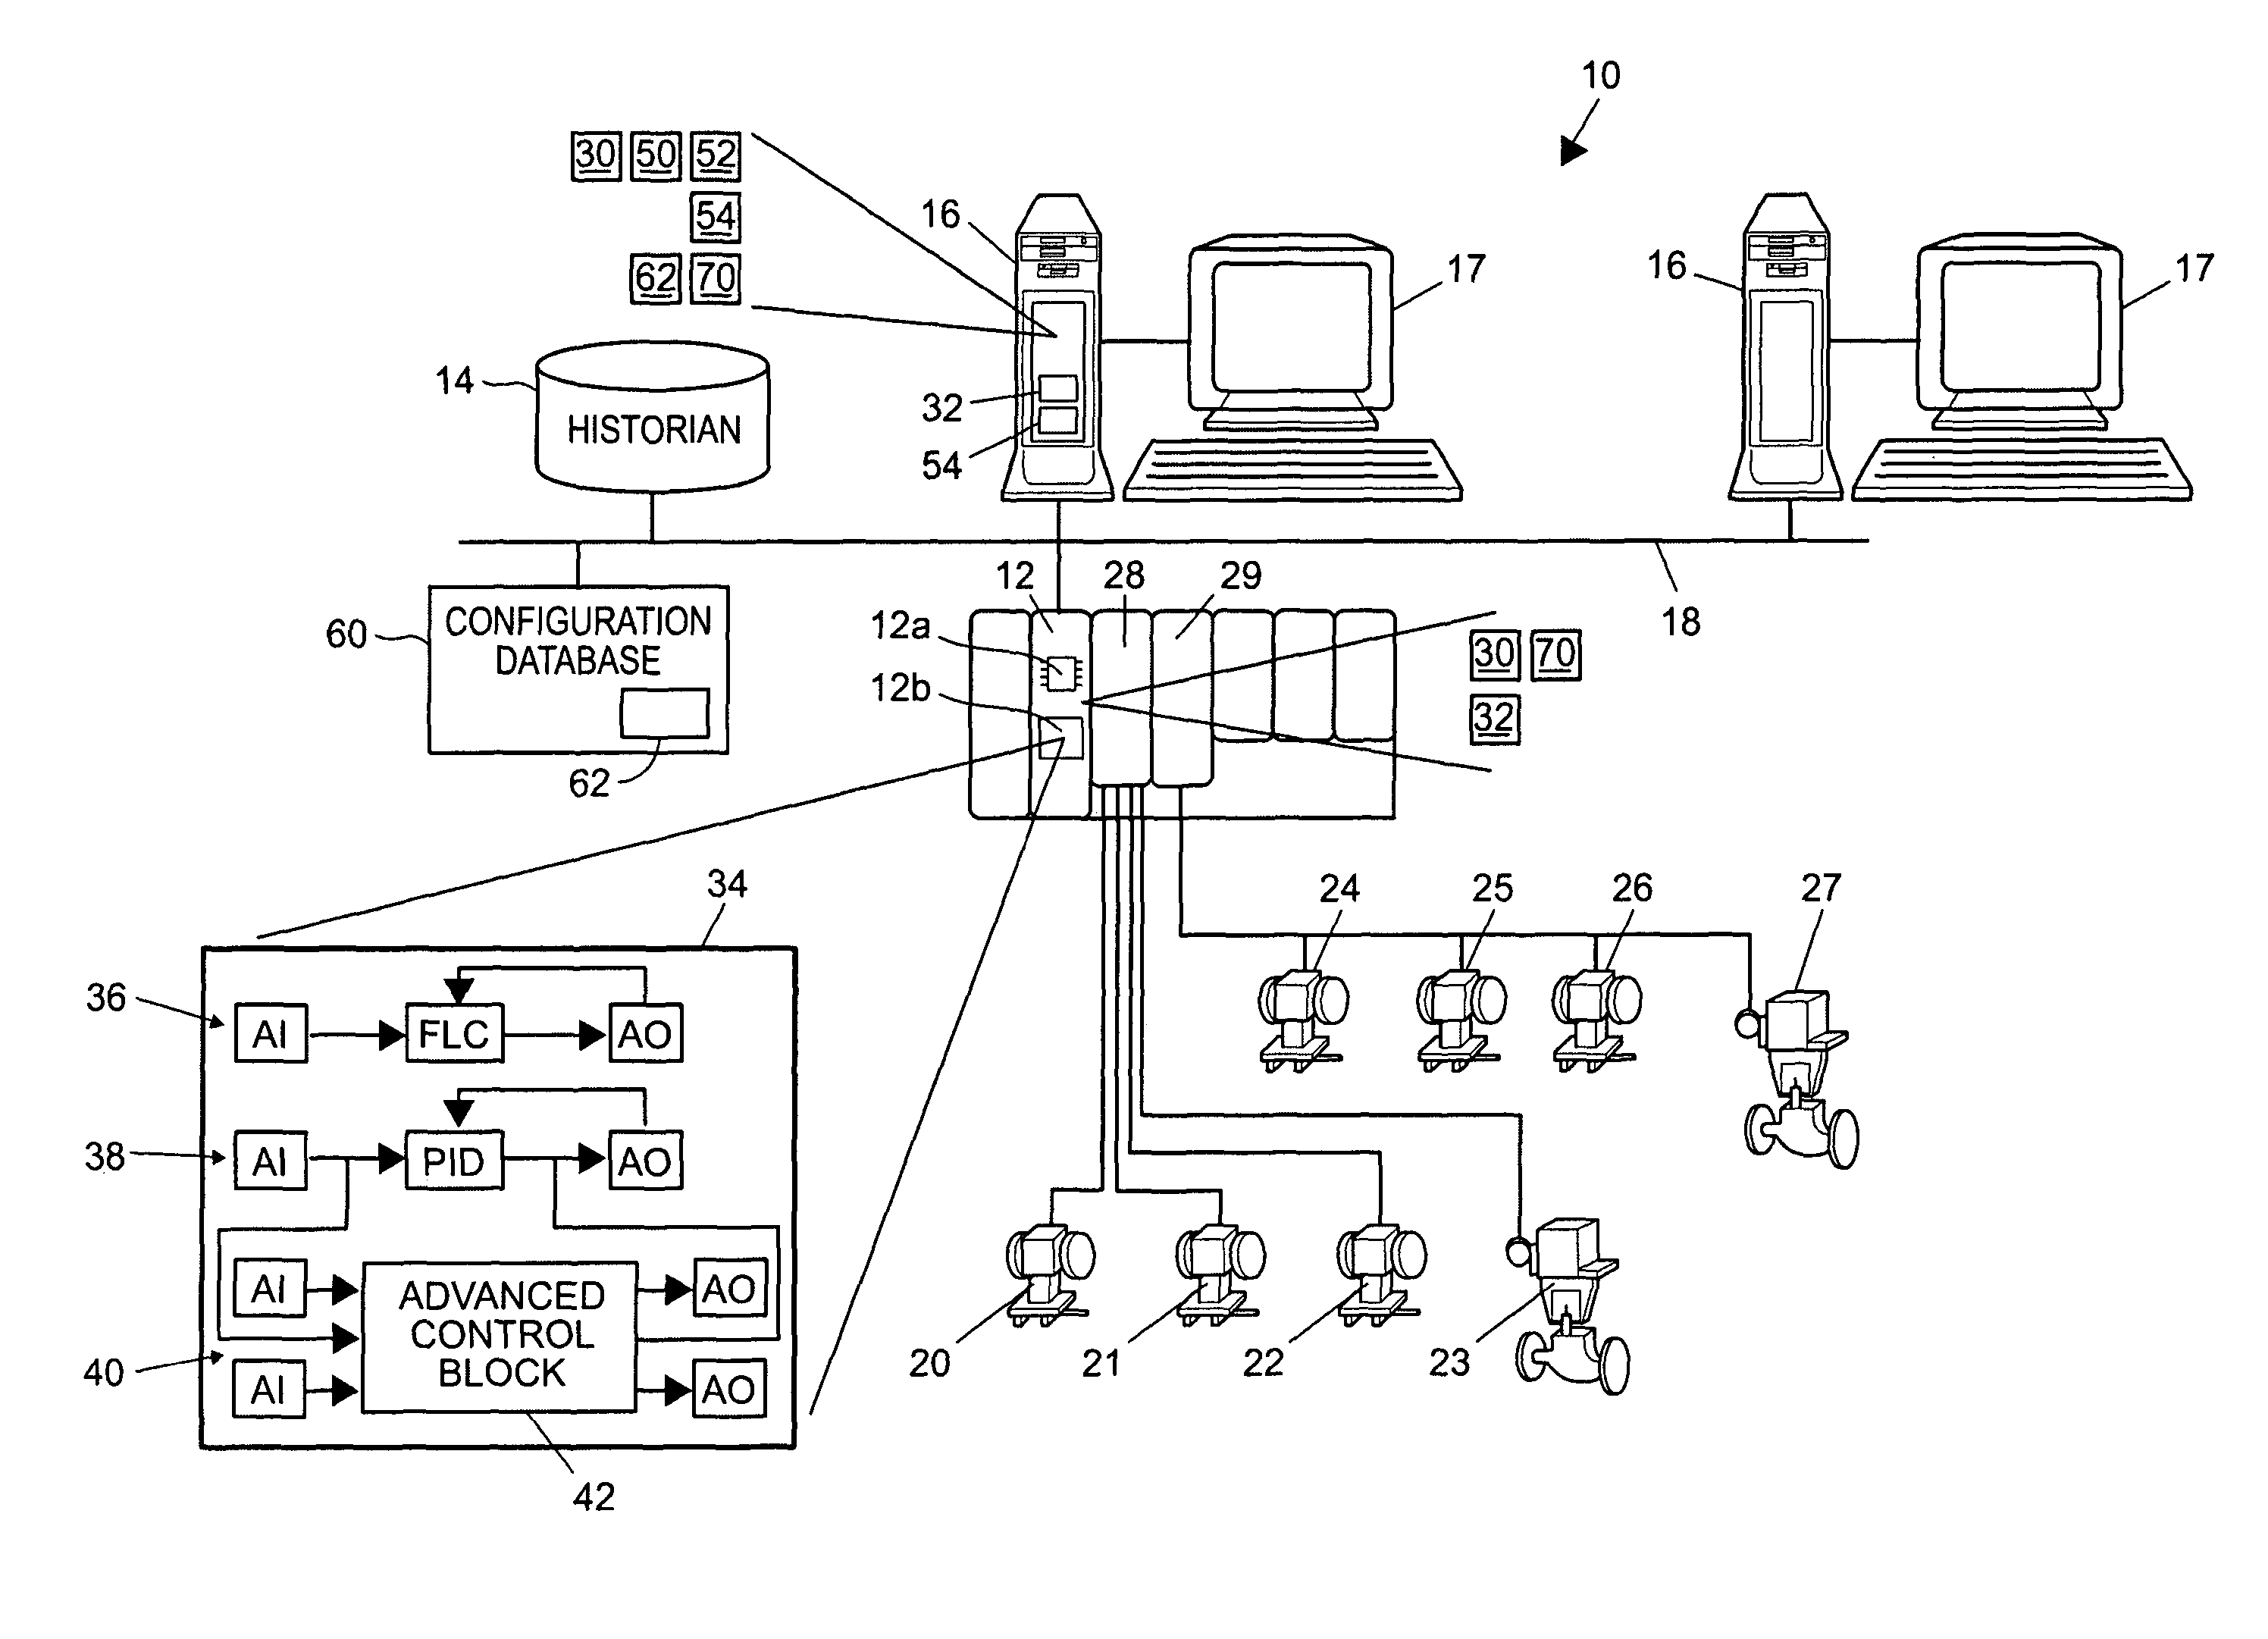 Method and system for controlling a batch process